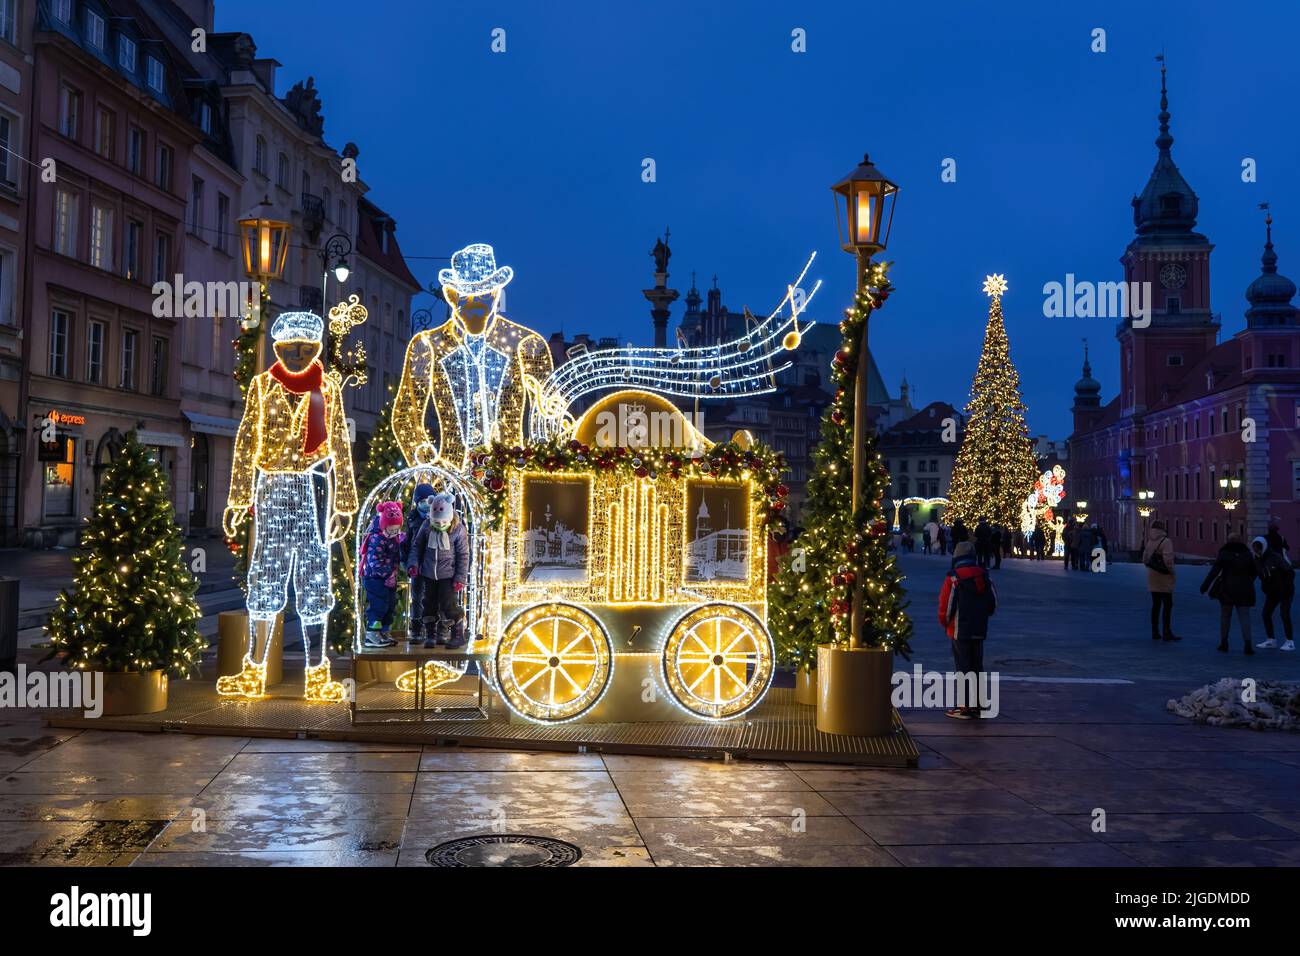 Winter holiday illuminated installation at night with place for children on square in the Old Town of Warsaw city during Christmas time in Poland. Stock Photo